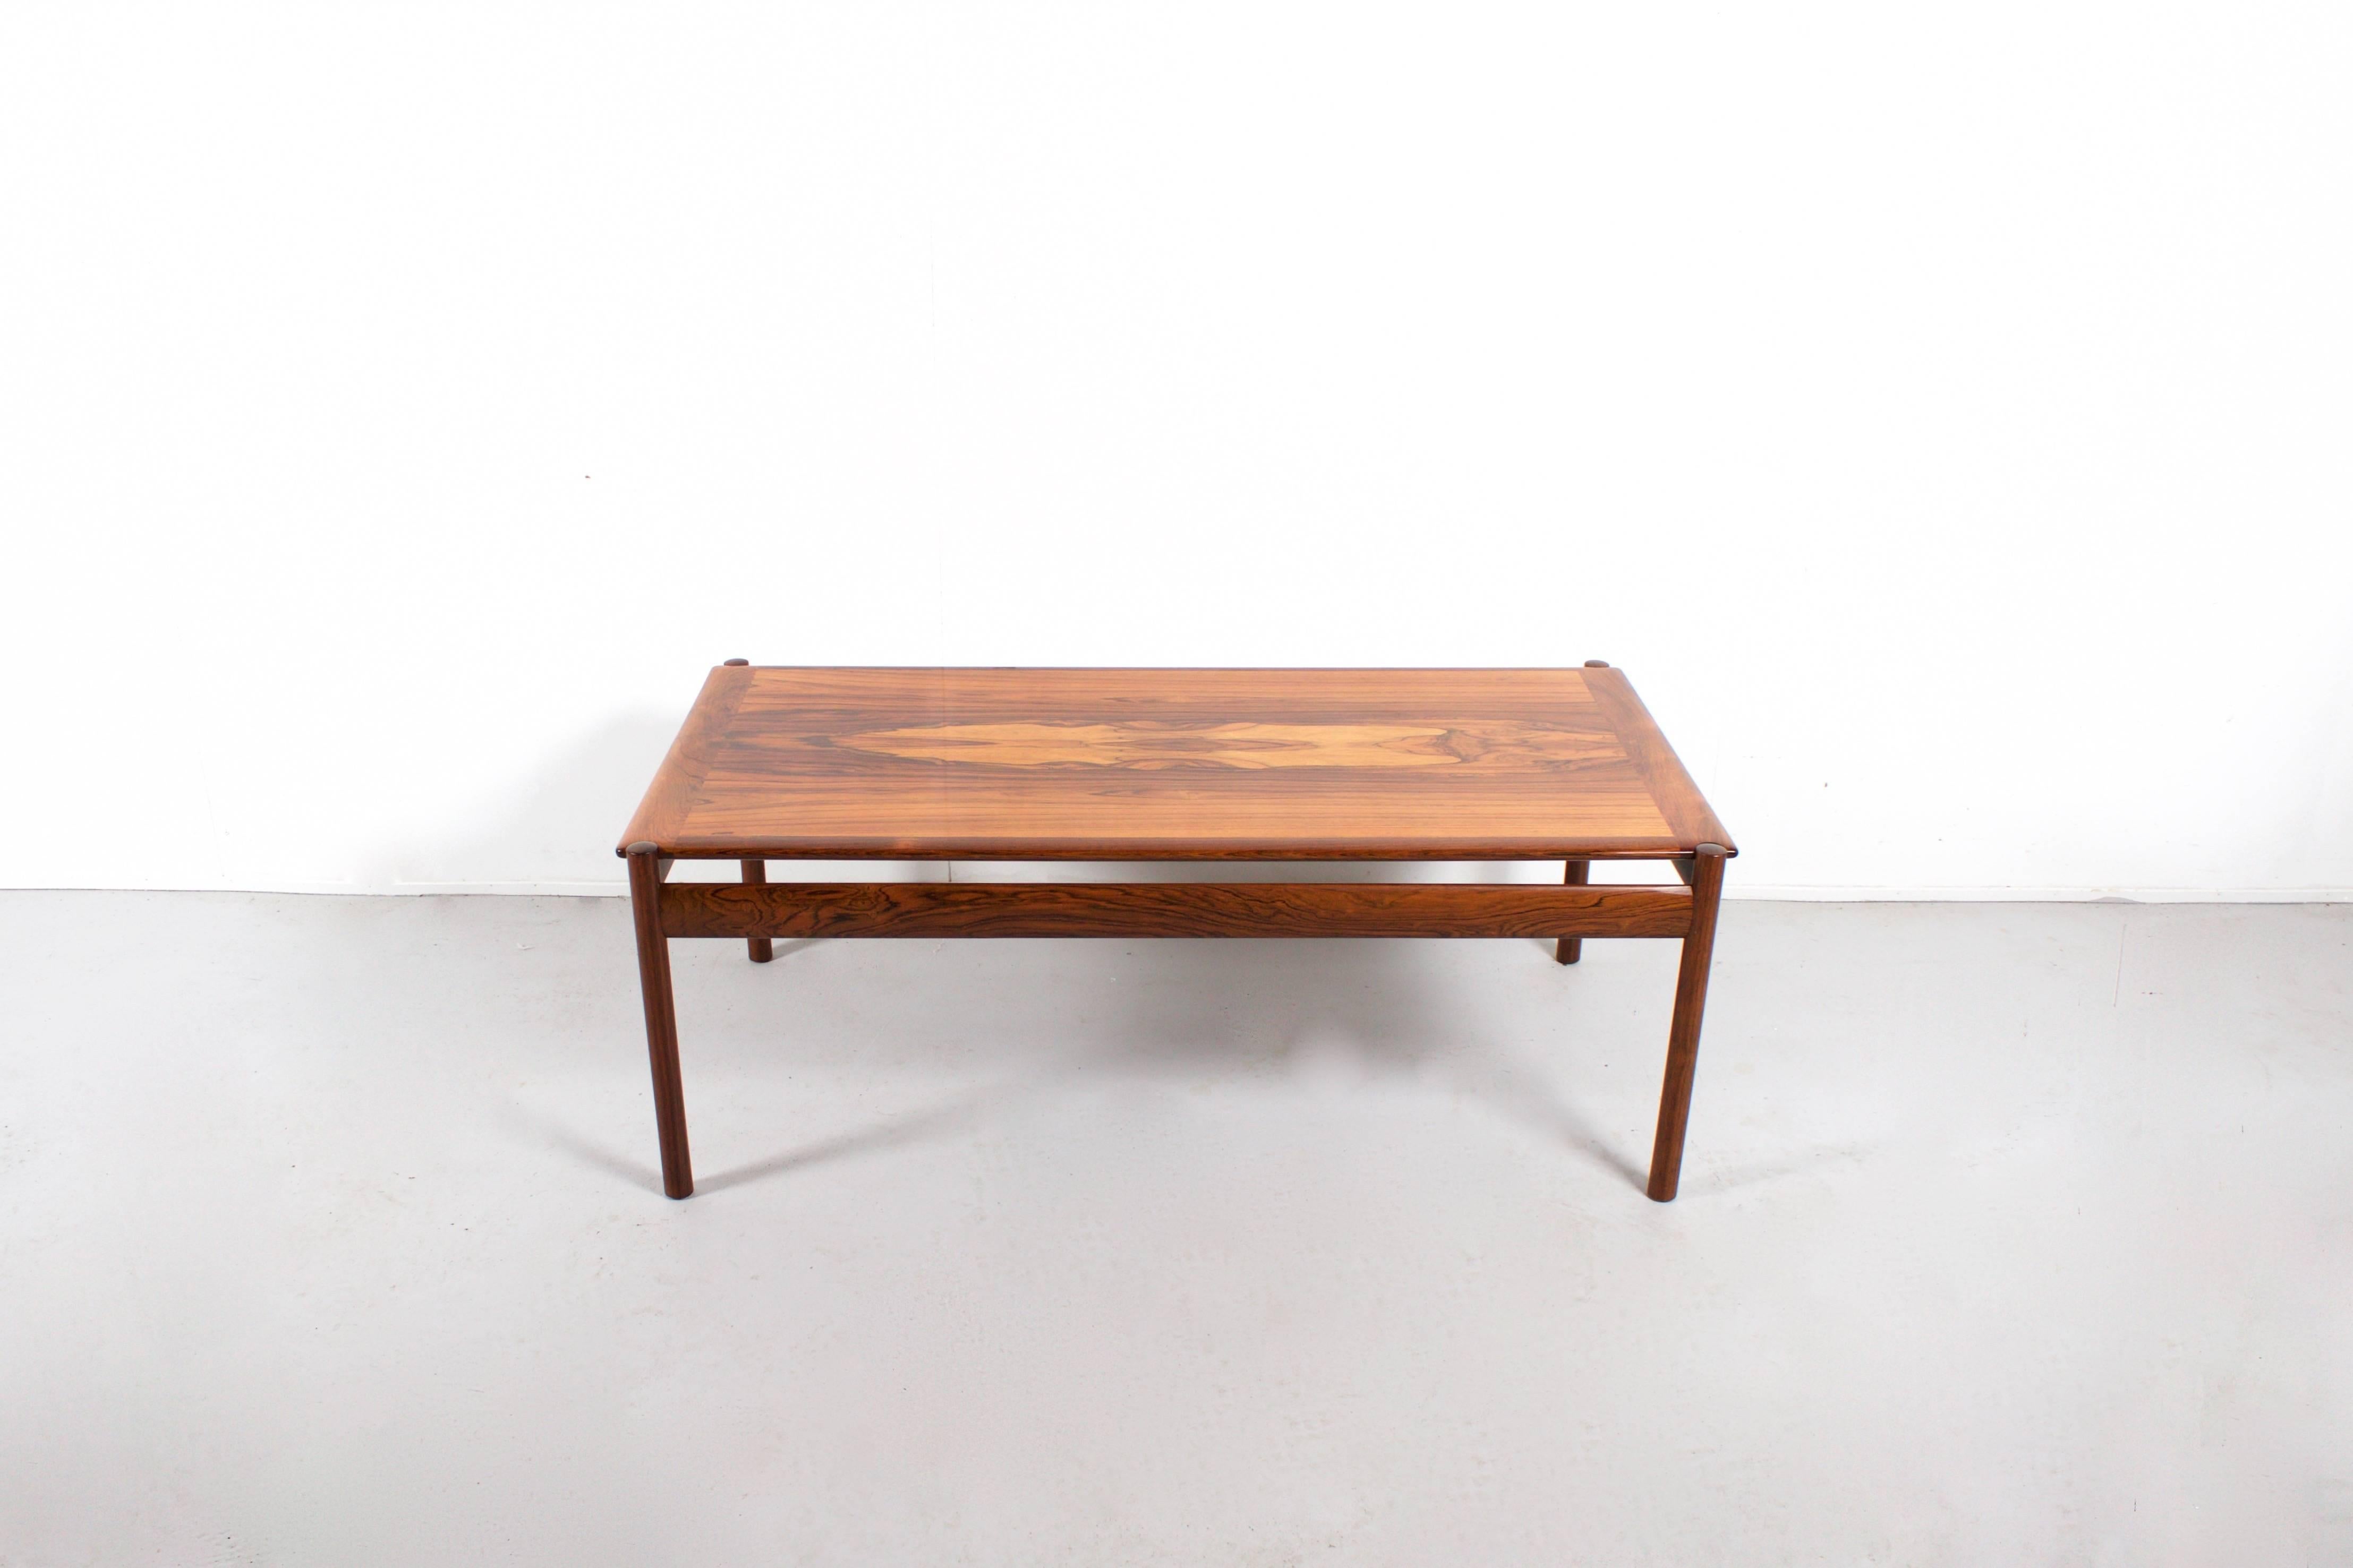 Stunning Sven Ivar Dysthe Coffee Table in solid wood.

This table is part of the high quality 1001 series made by Dokka Møbler, Norway.

The top in solid rosewood shows a beautiful grain and is finished with a high gloss lacquer.

The wooden